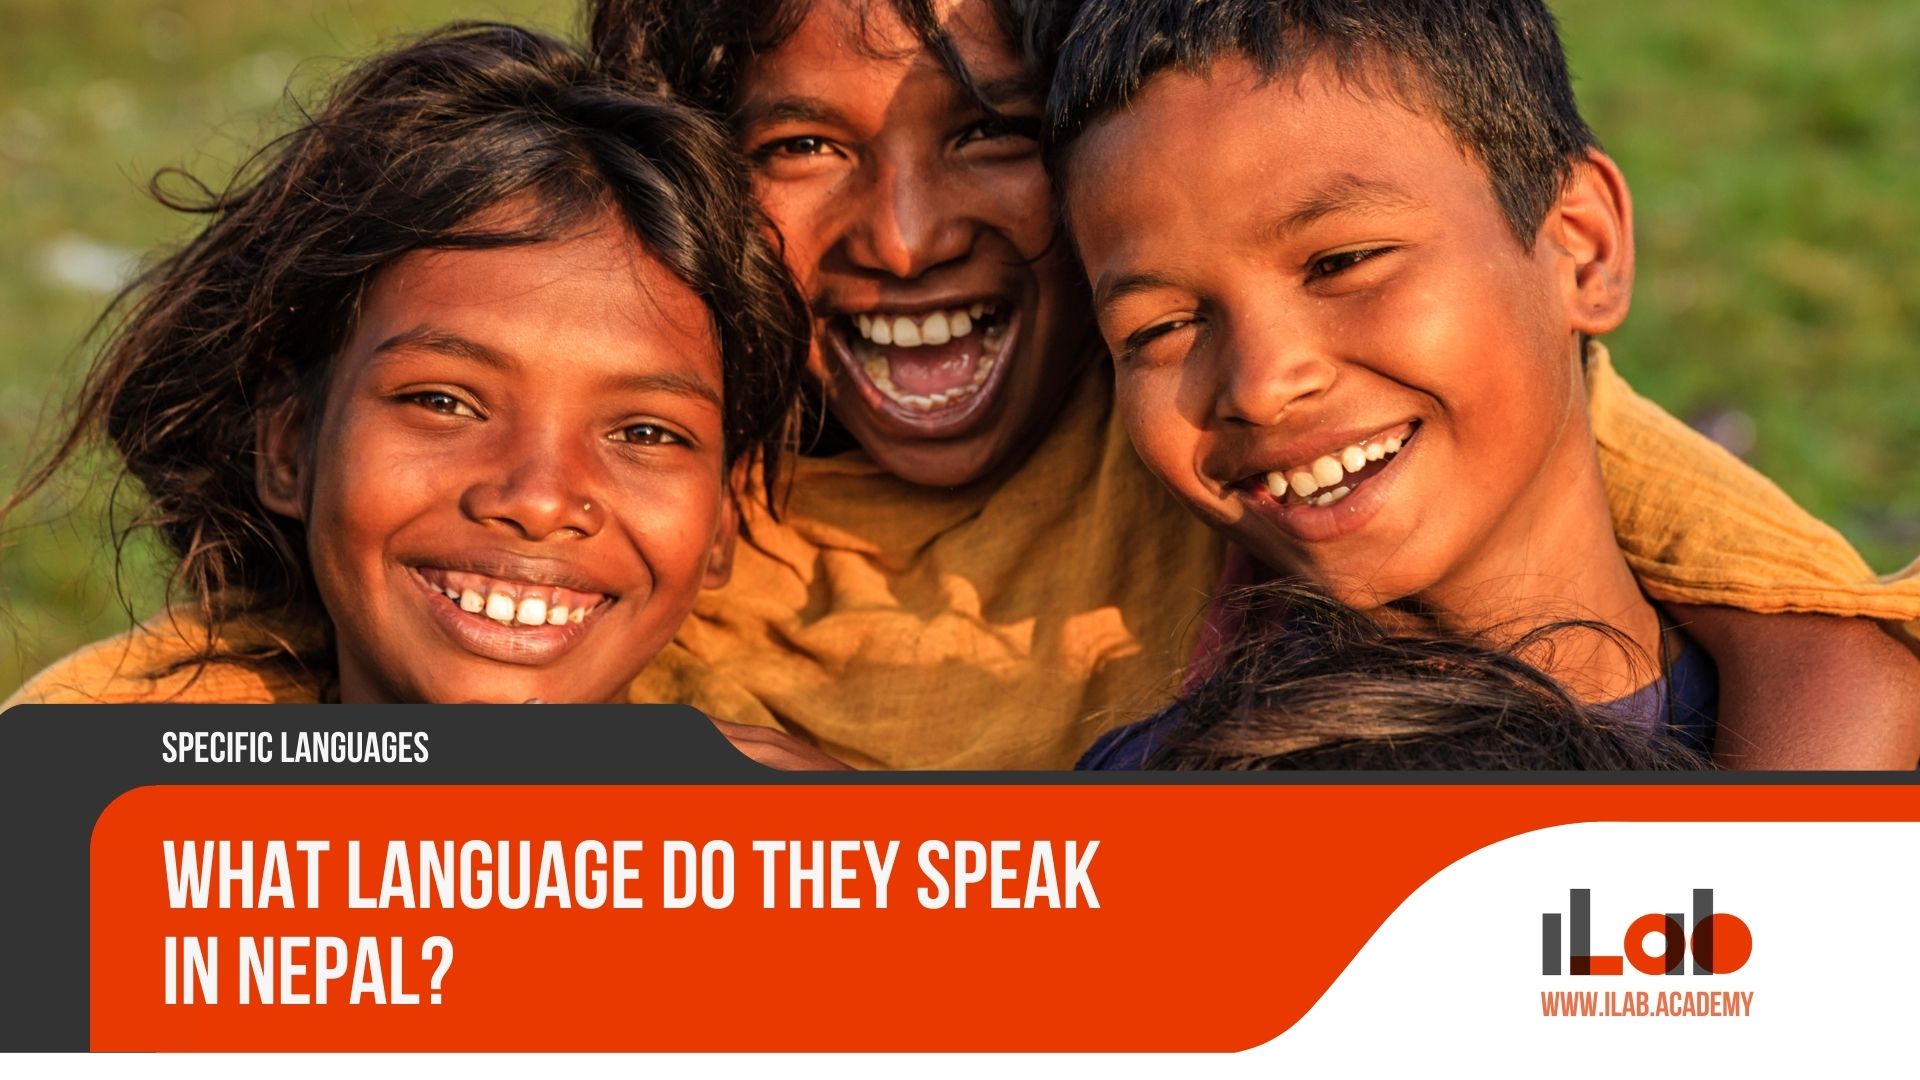 What Language Do They Speak in Nepal?